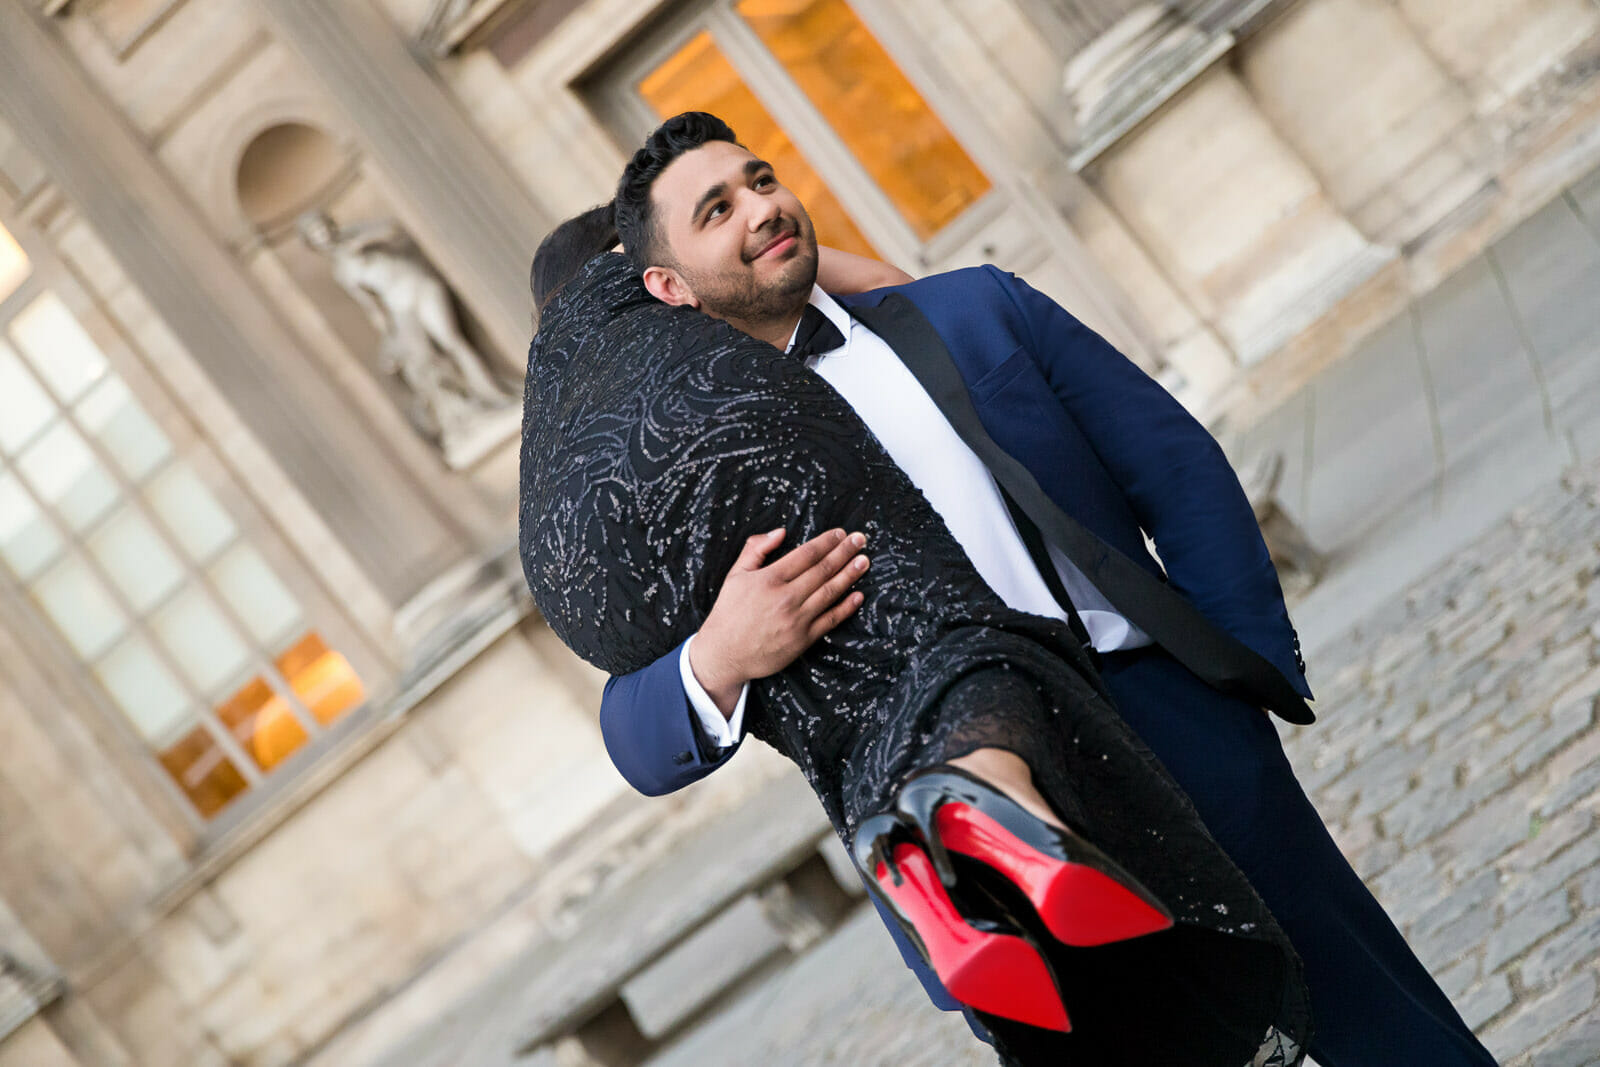 Paris engagement pictures at the Louvre Museum with red bottom Louboutin